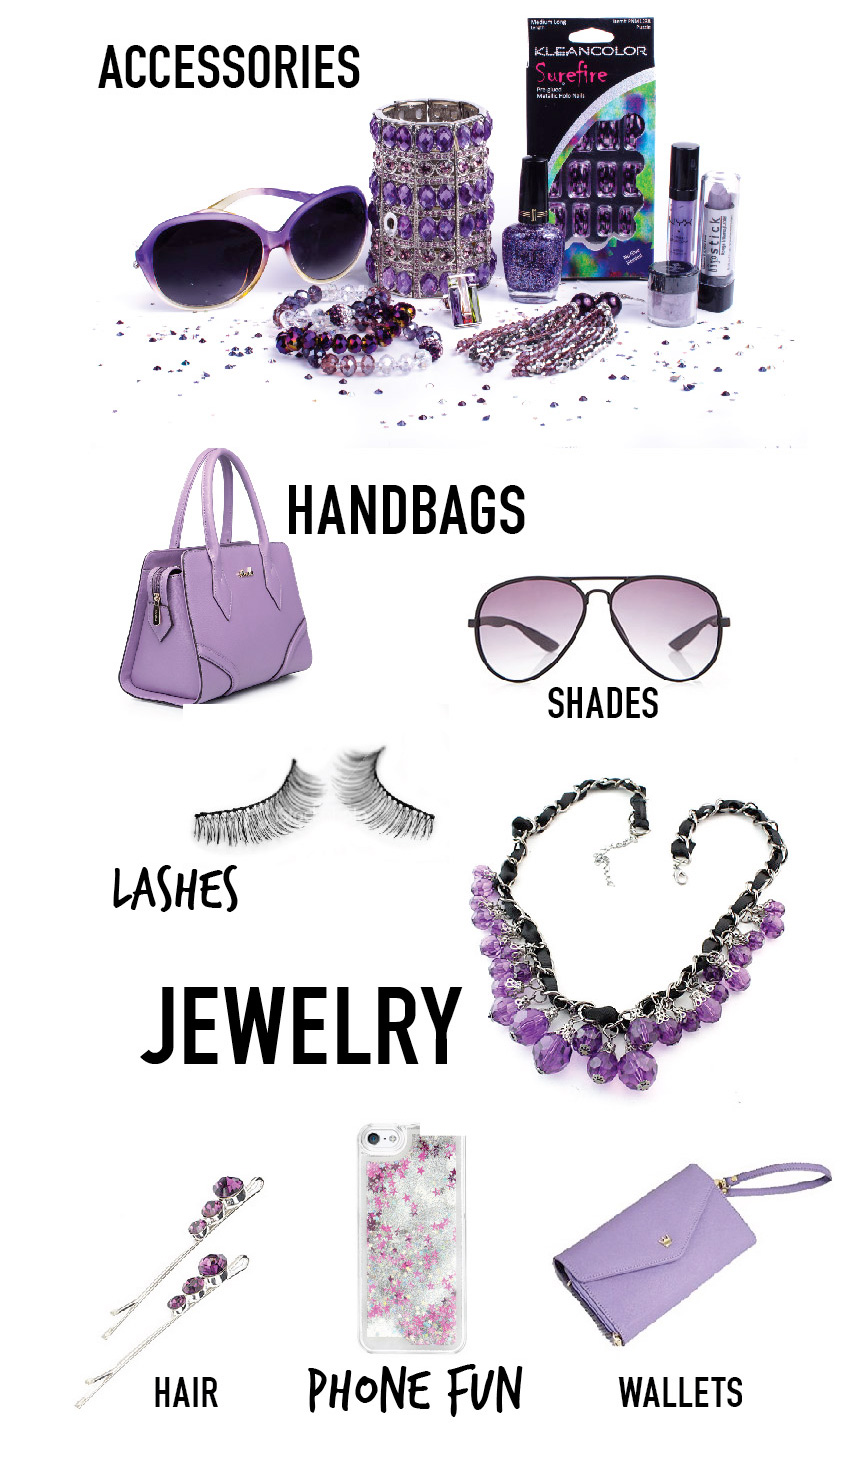 Accessories-page-01